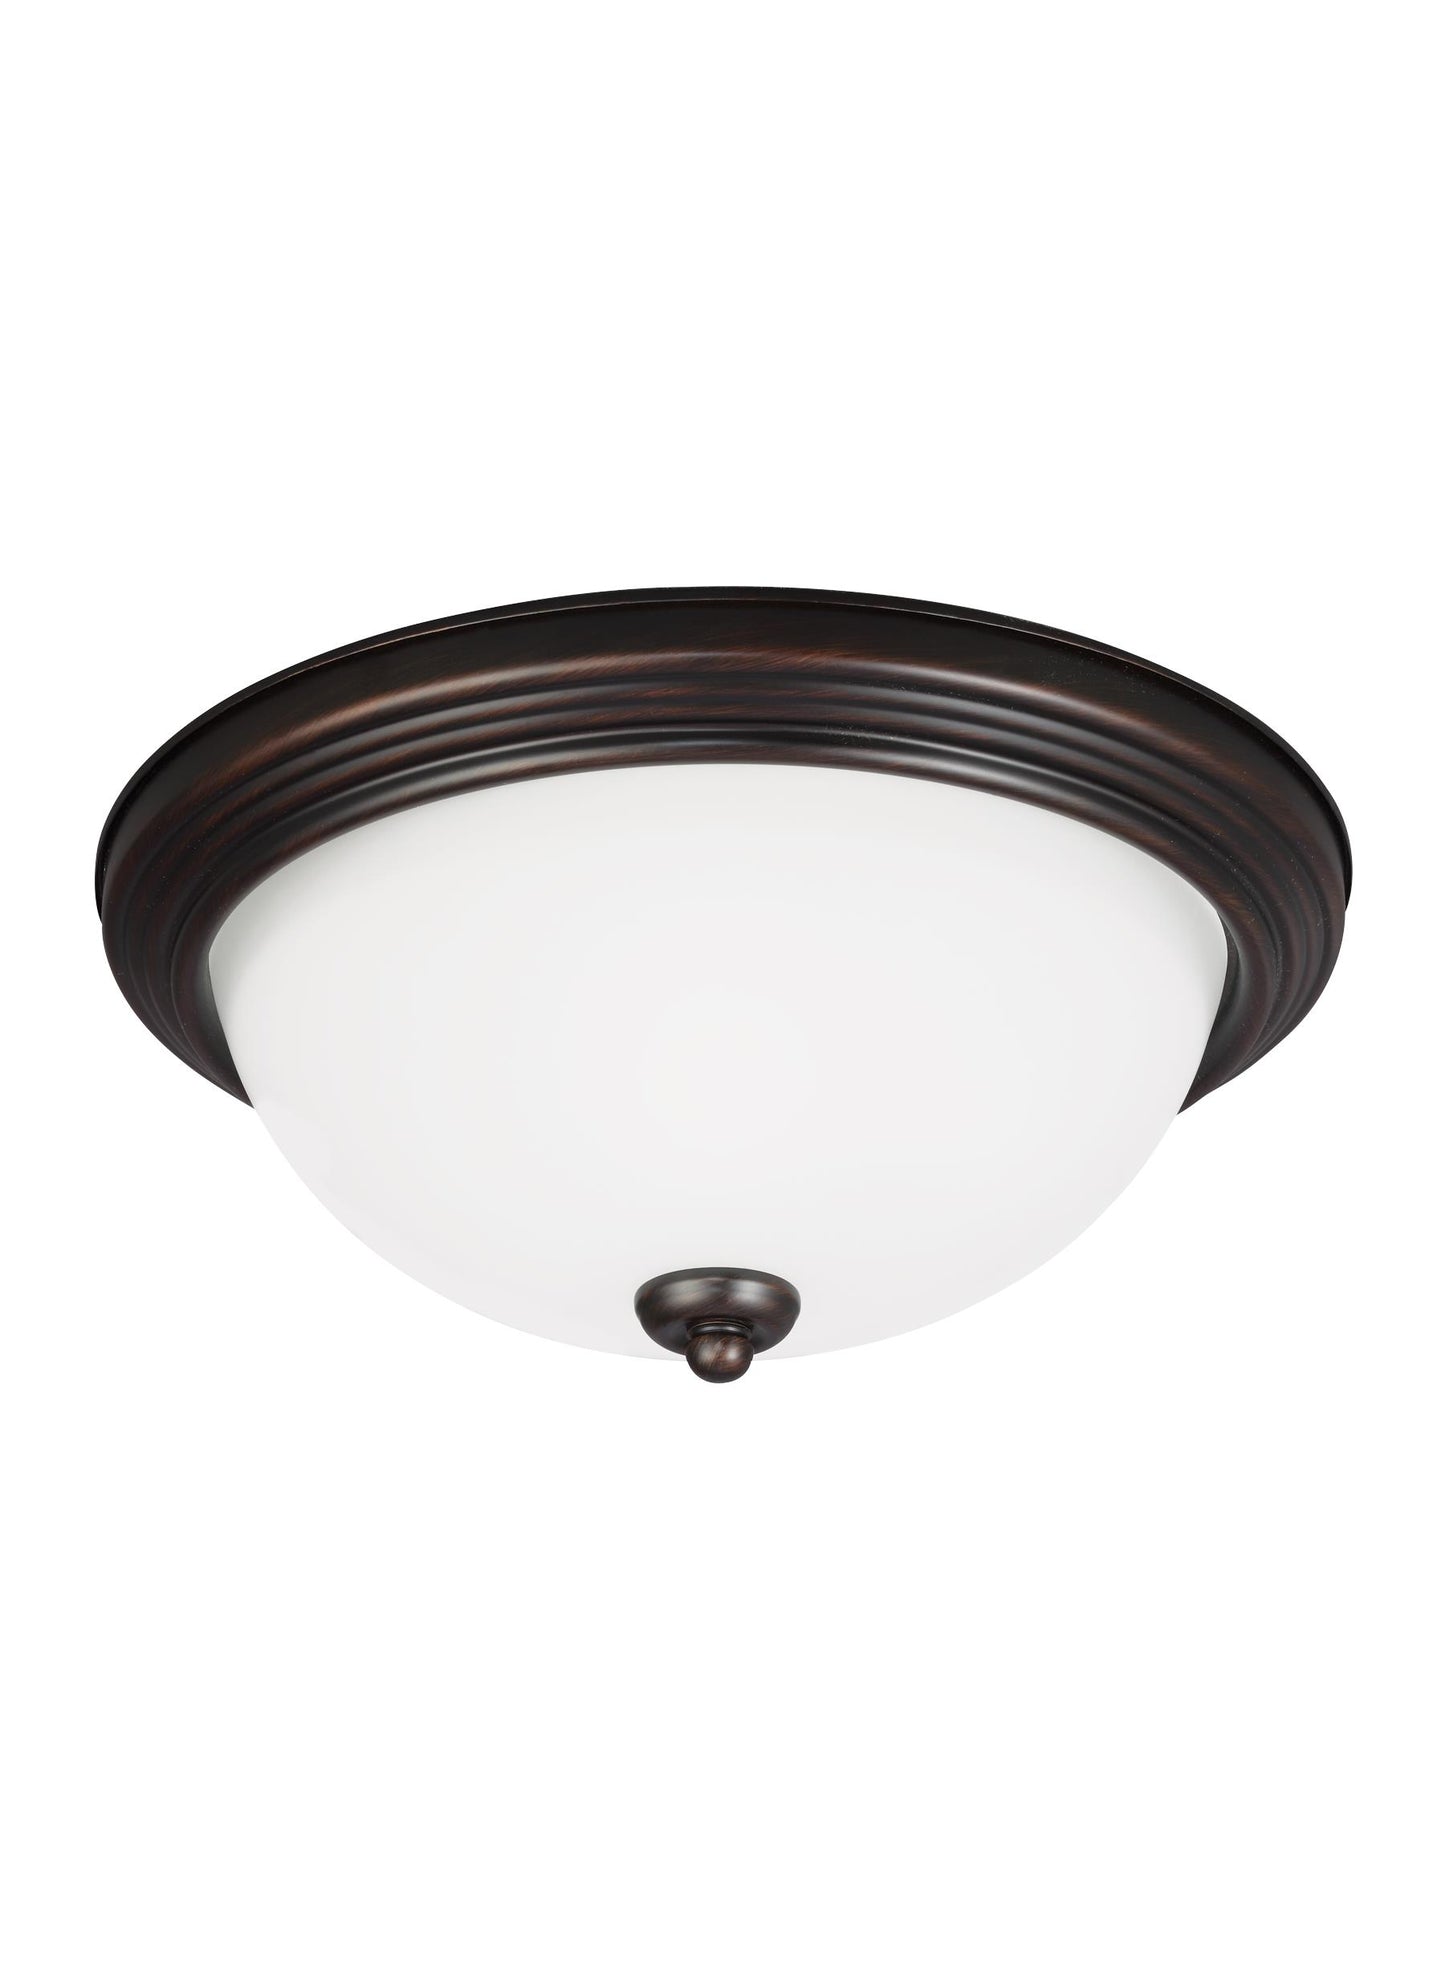 Geary transitional 1-light indoor dimmable ceiling flush mount fixture in bronze finish with satin etched glass diffuser